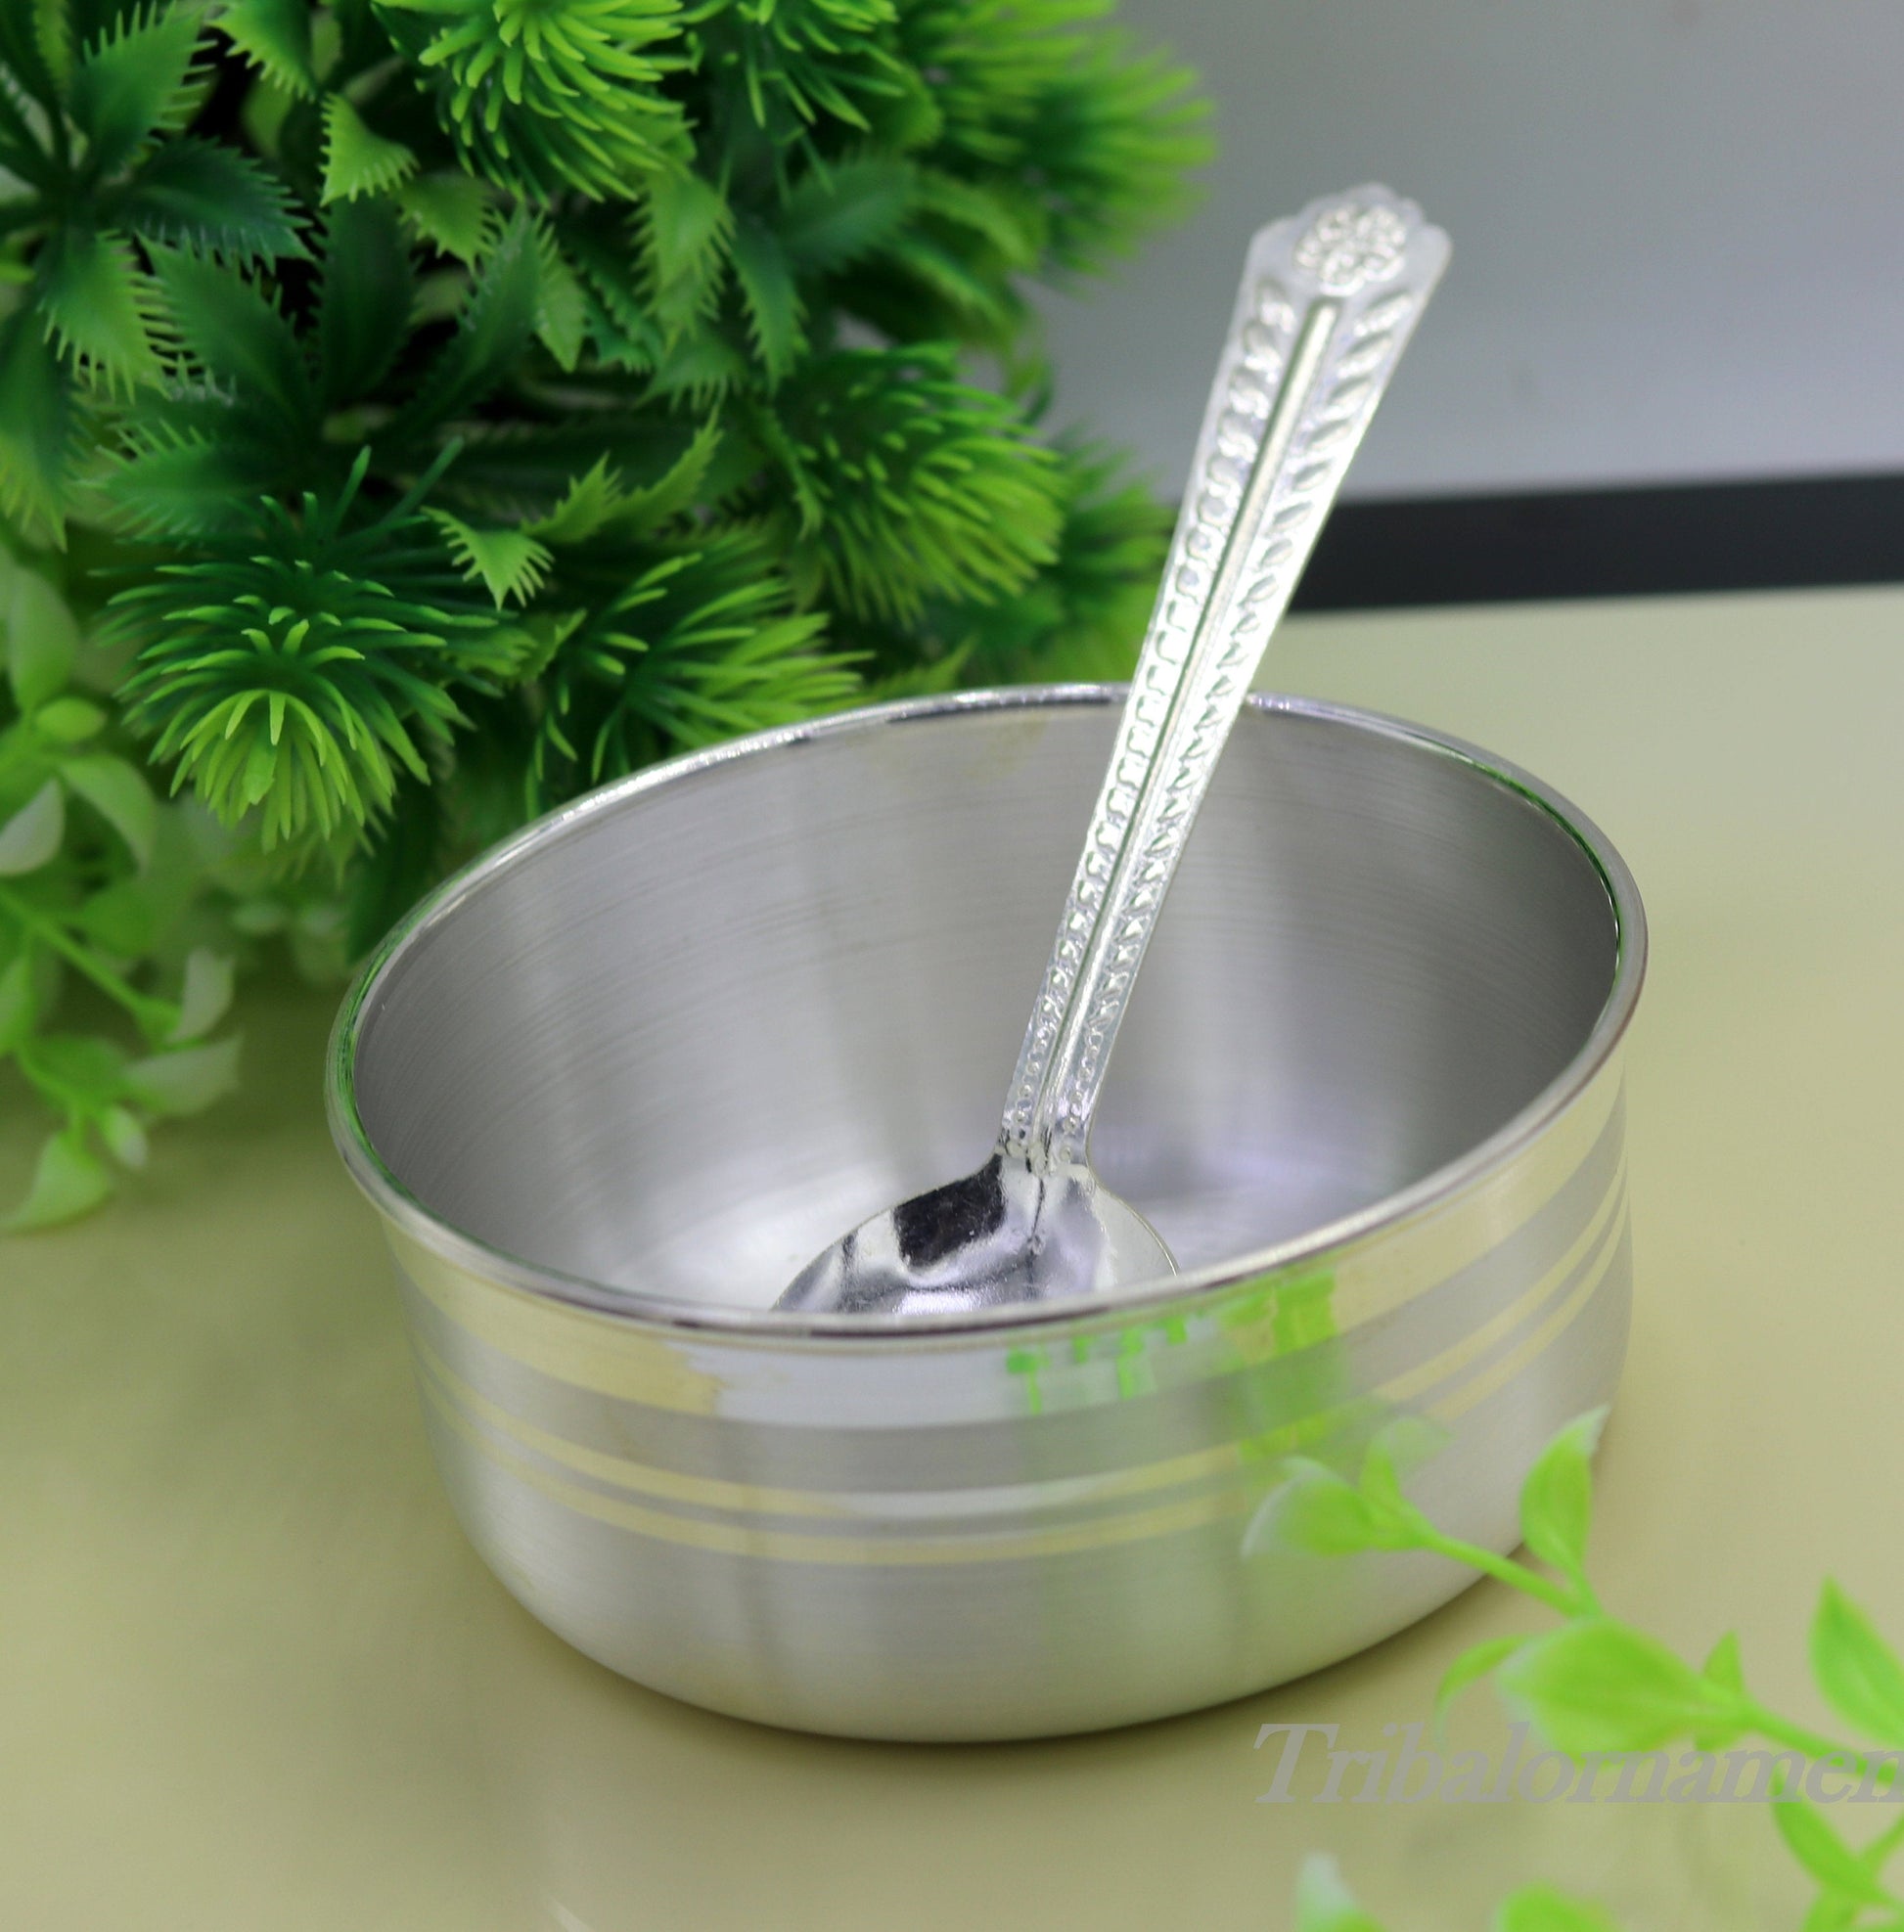 999 pure fine silver handmade solid bowl and spoon, silver baby utensils, stay healthy kids/baby for using silver vessels sv25 - TRIBAL ORNAMENTS